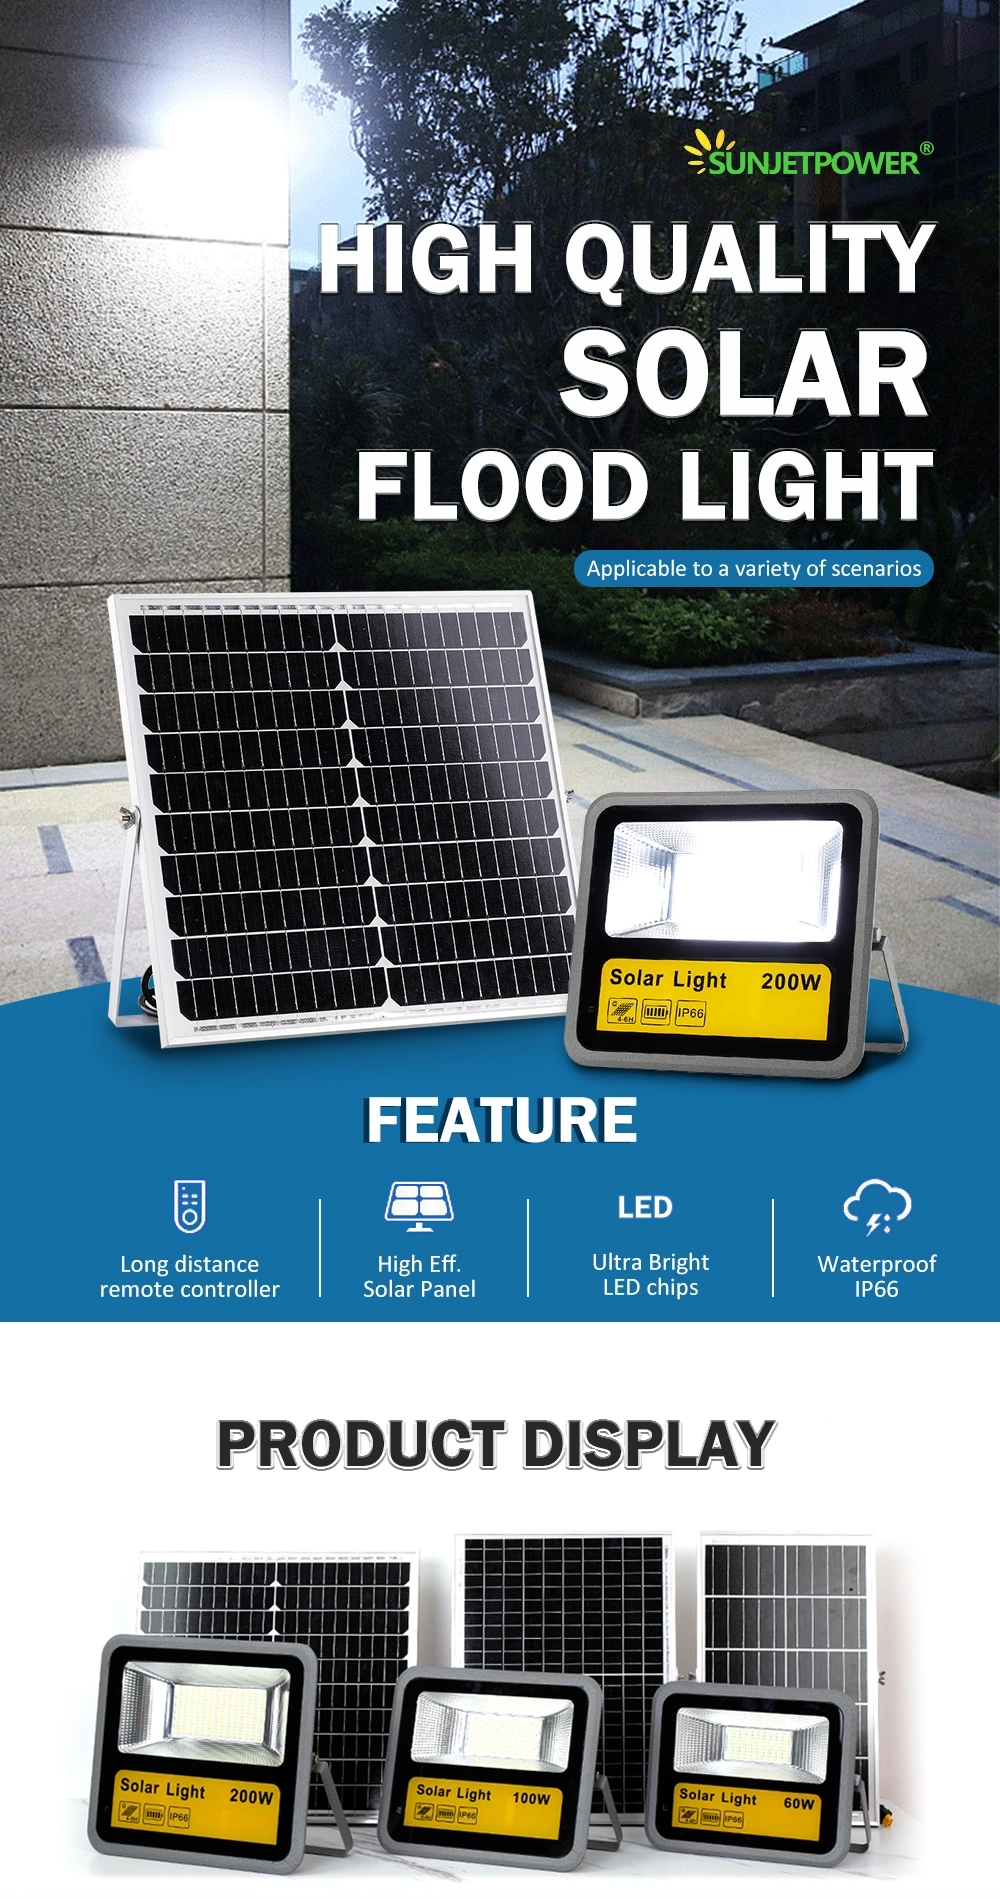 High Lumens LED Solar Lights Outdoor Bright Solar Dusk to Dawn Light with Battery, IP65 Waterproof Outdoor Solar Powered Security Flood Light for Garage Barn